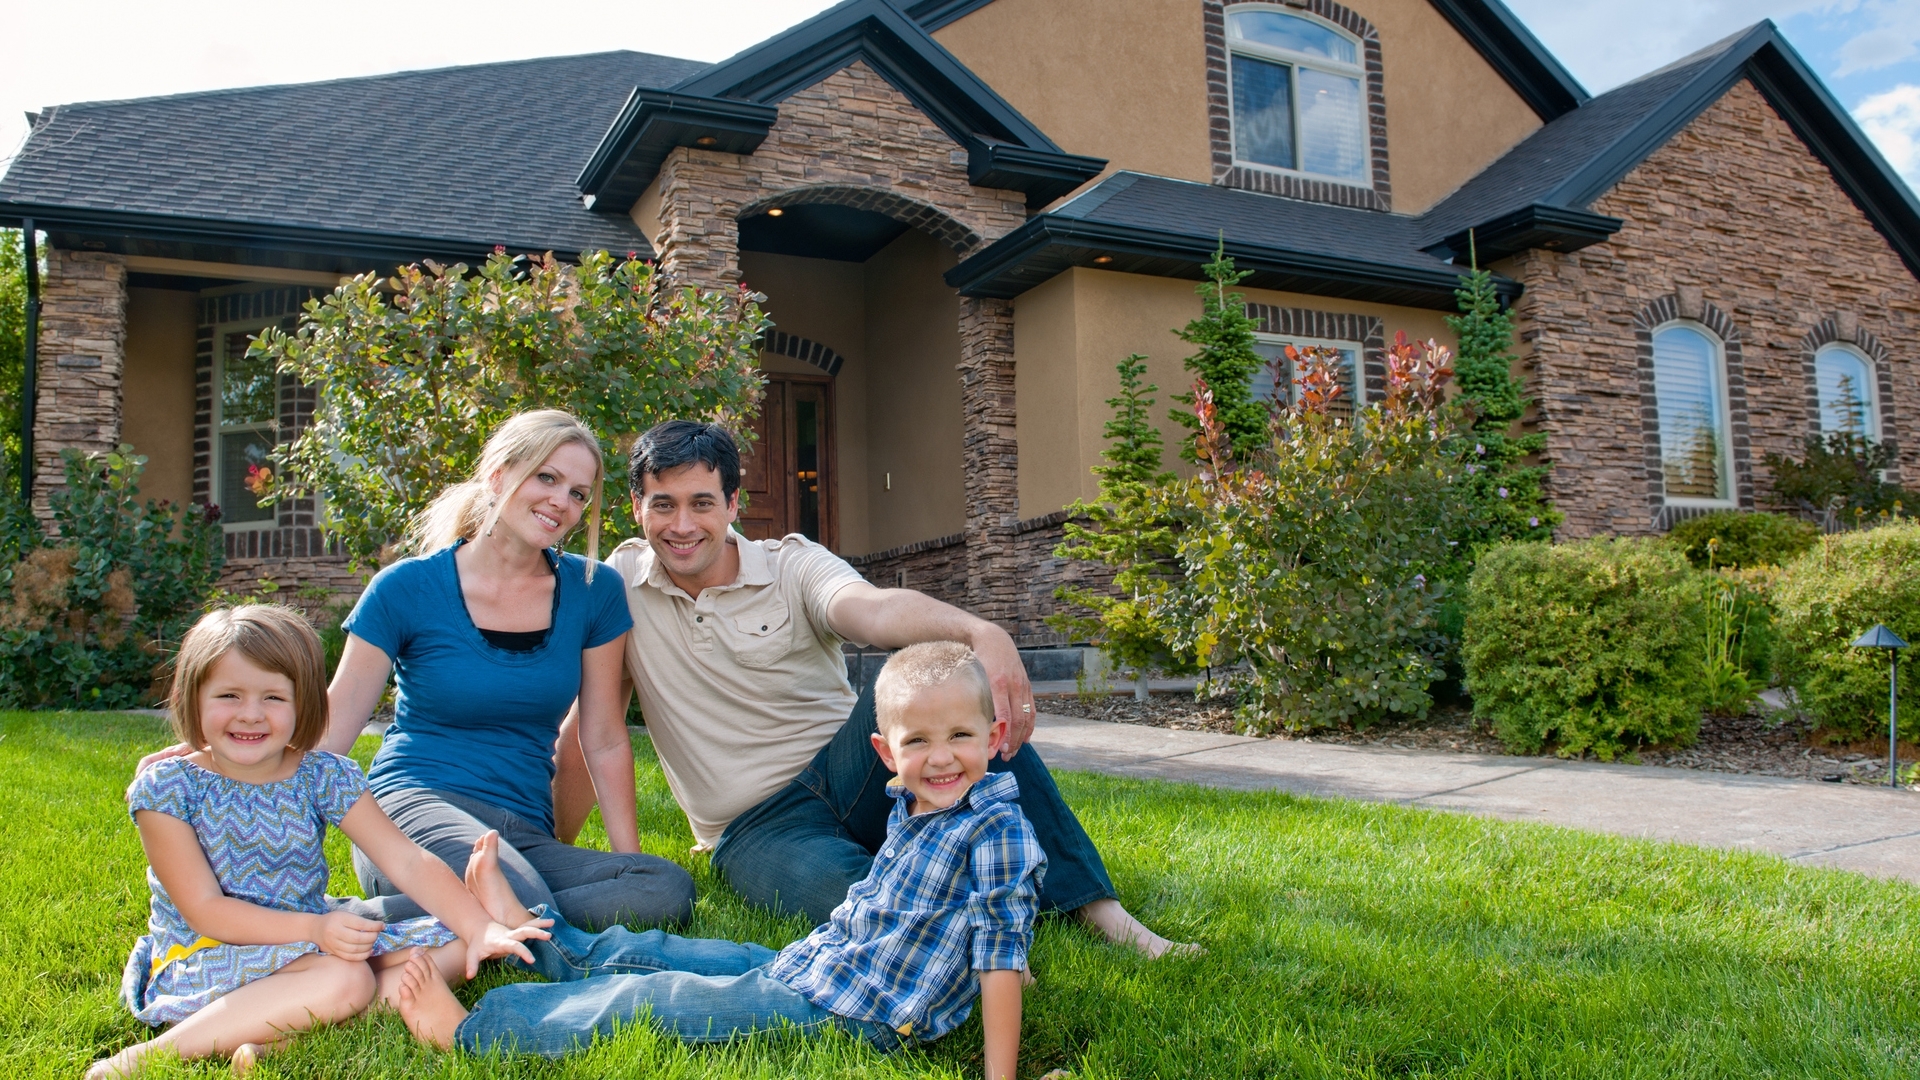 Smiling family on front lawn of a house